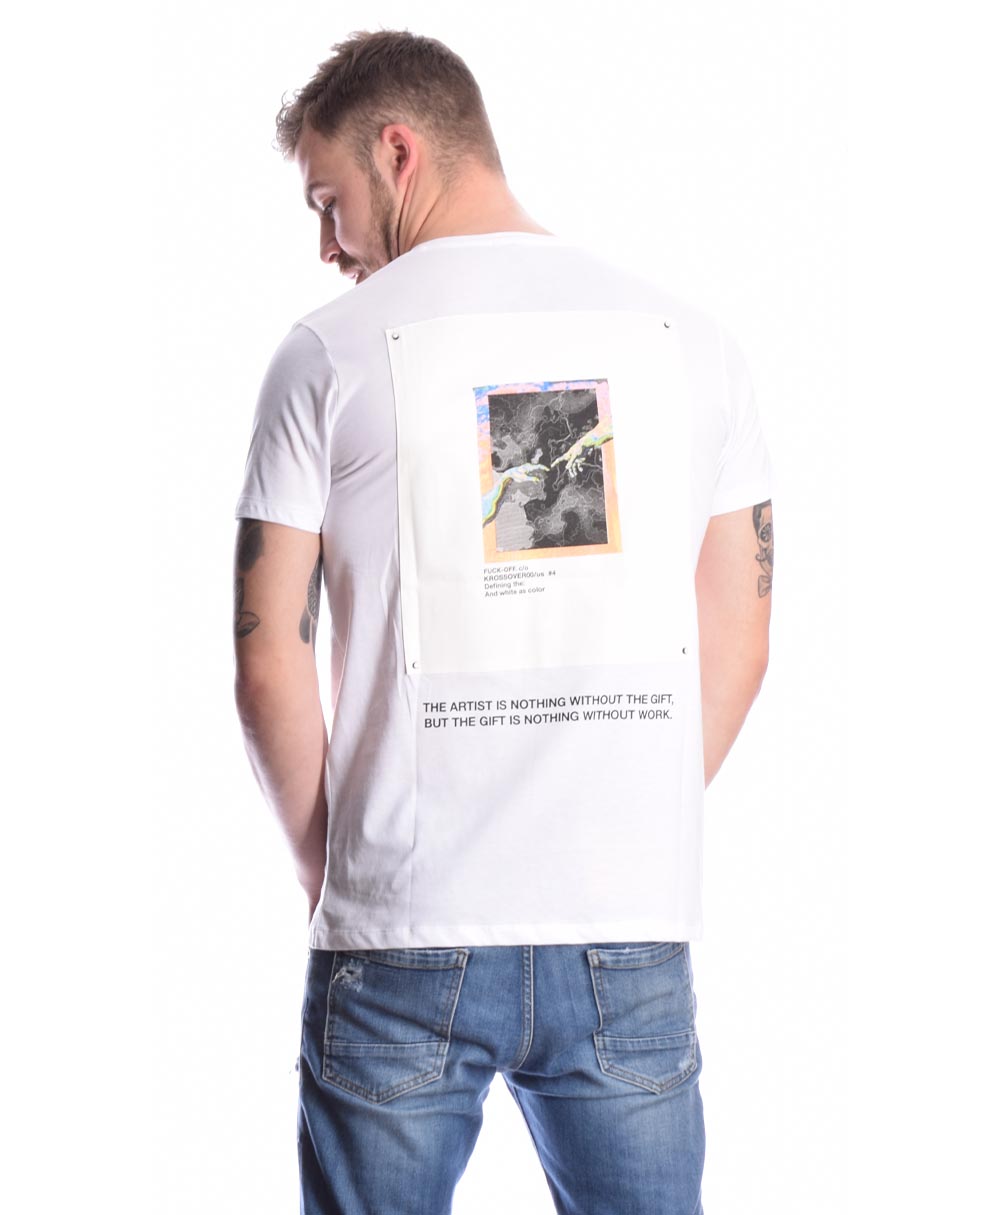 hand of god cross over fingers t-shirt made in italy by imperial fashion 2021